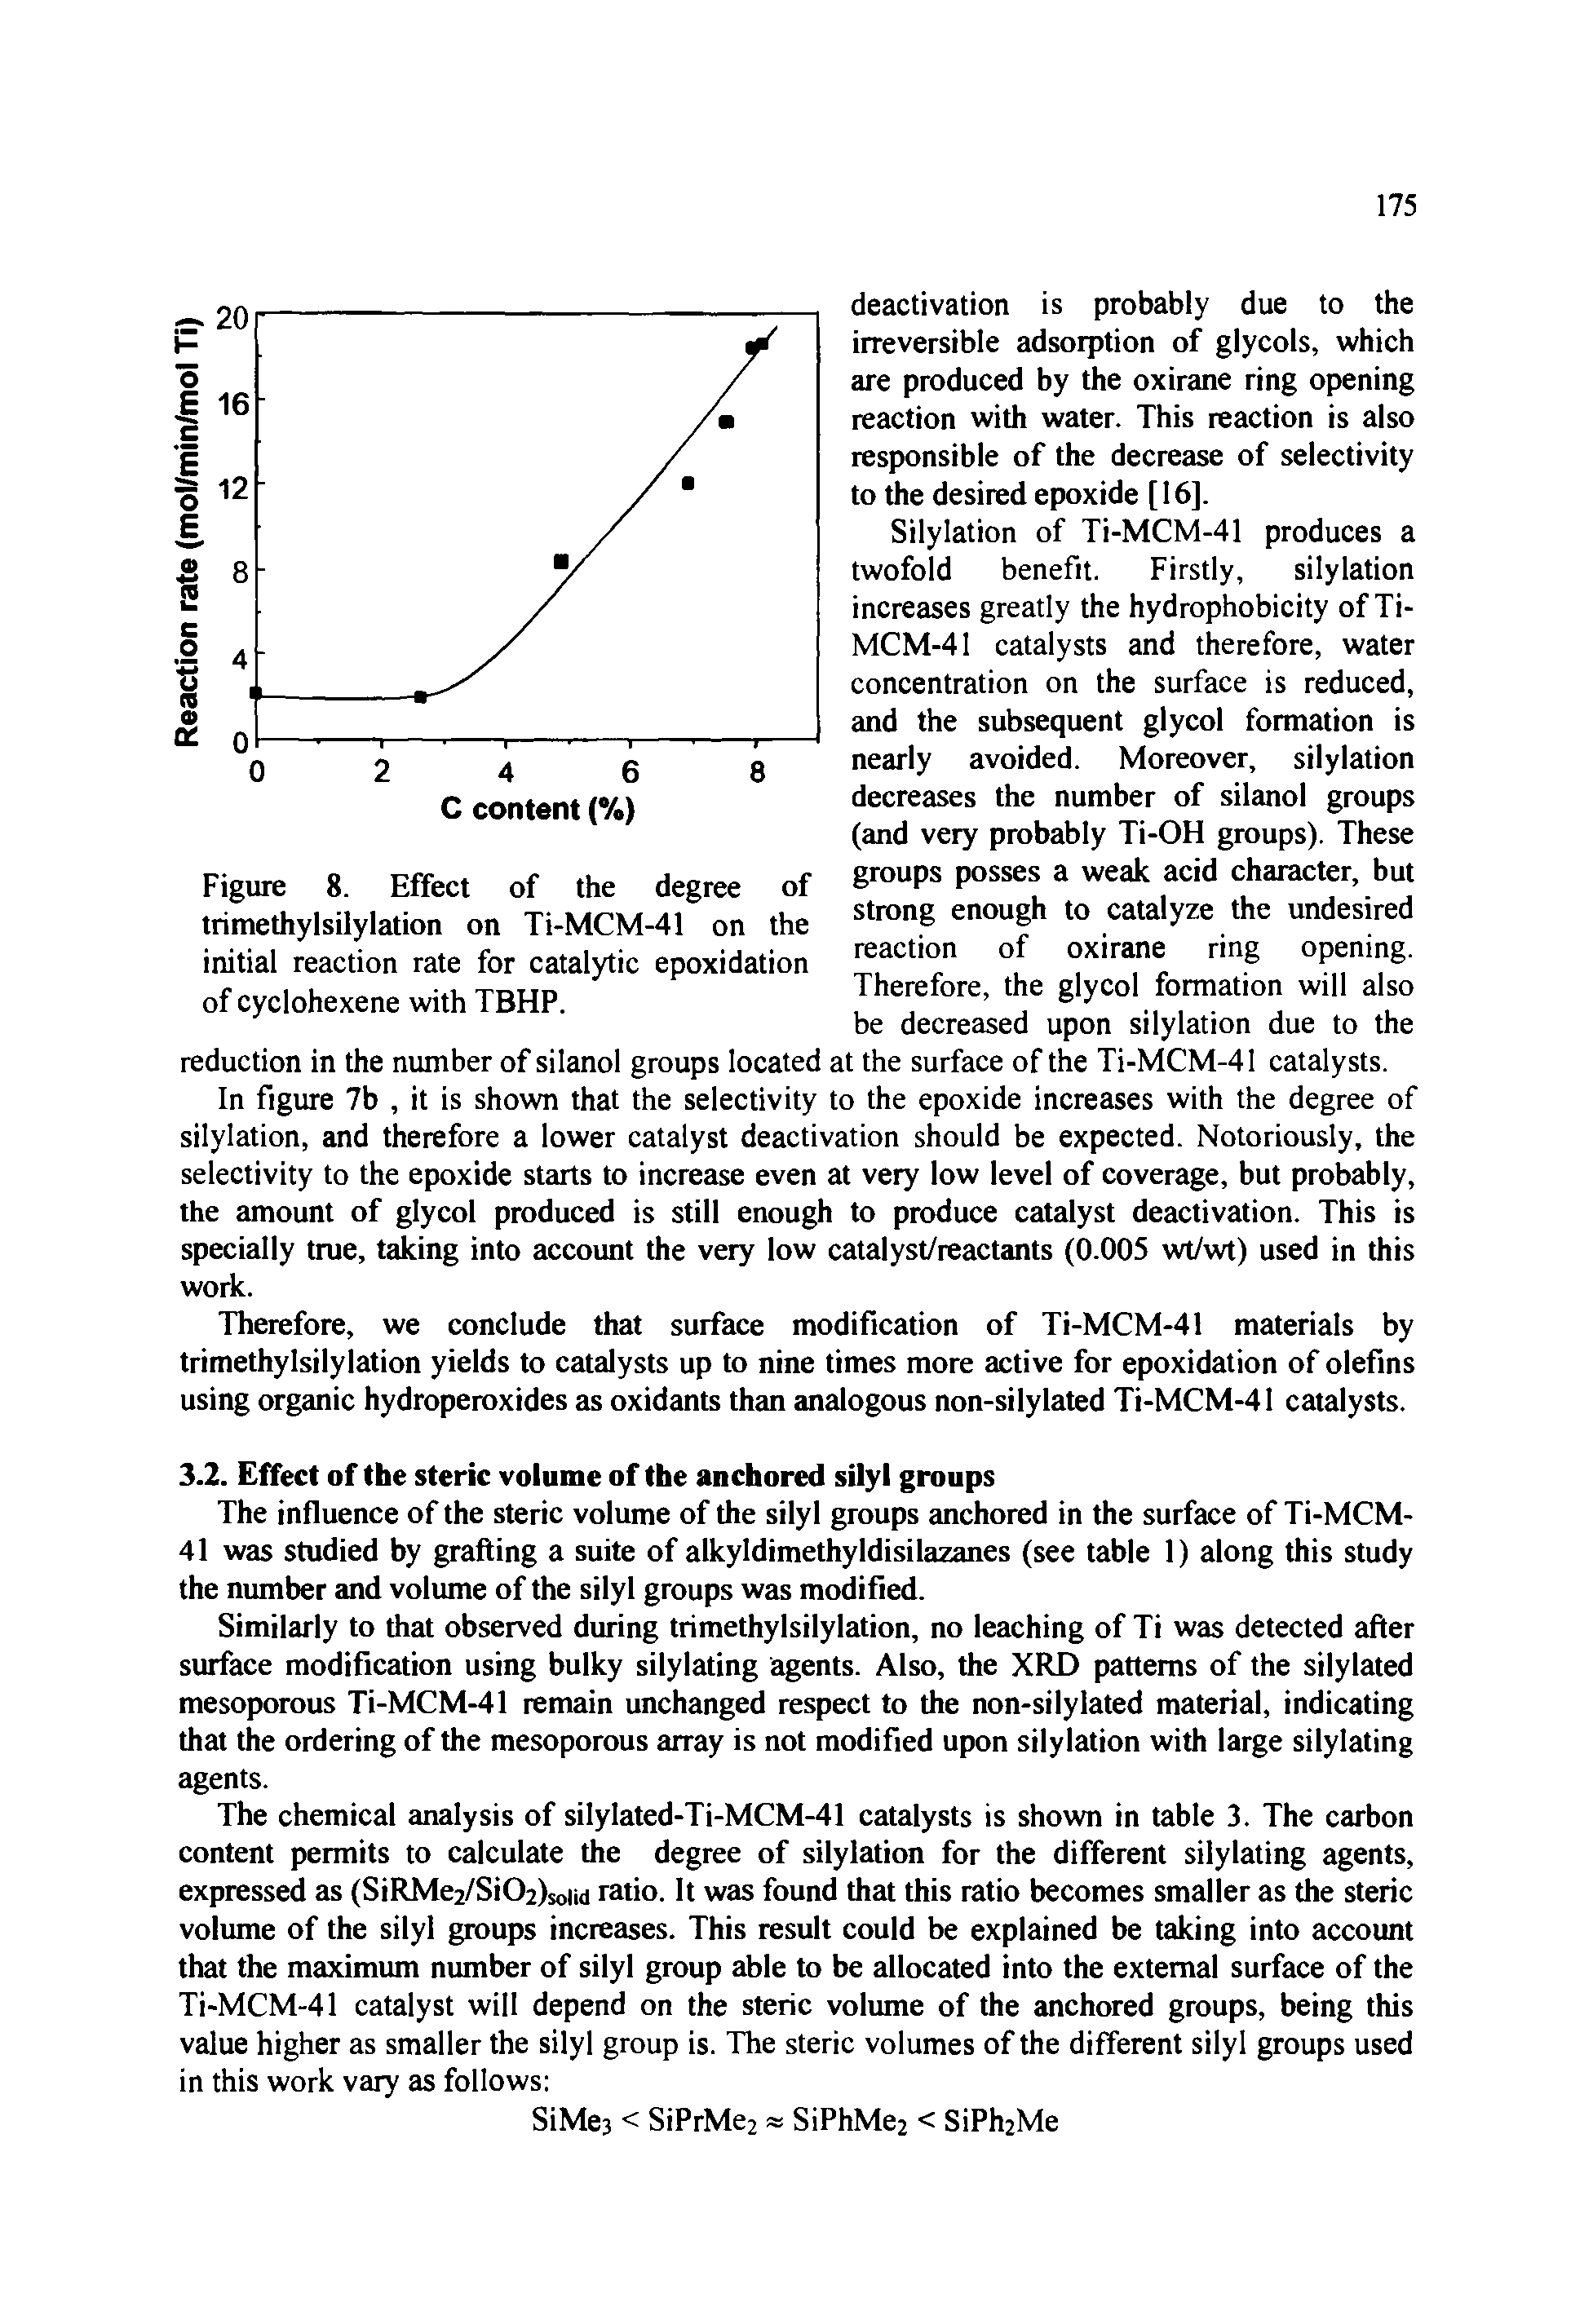 Figure 8. Effect of the degree of trimethylsilylation on Ti-MCM-41 on the initial reaction rate for catalytic epoxidation of cyclohexene with TBHP.